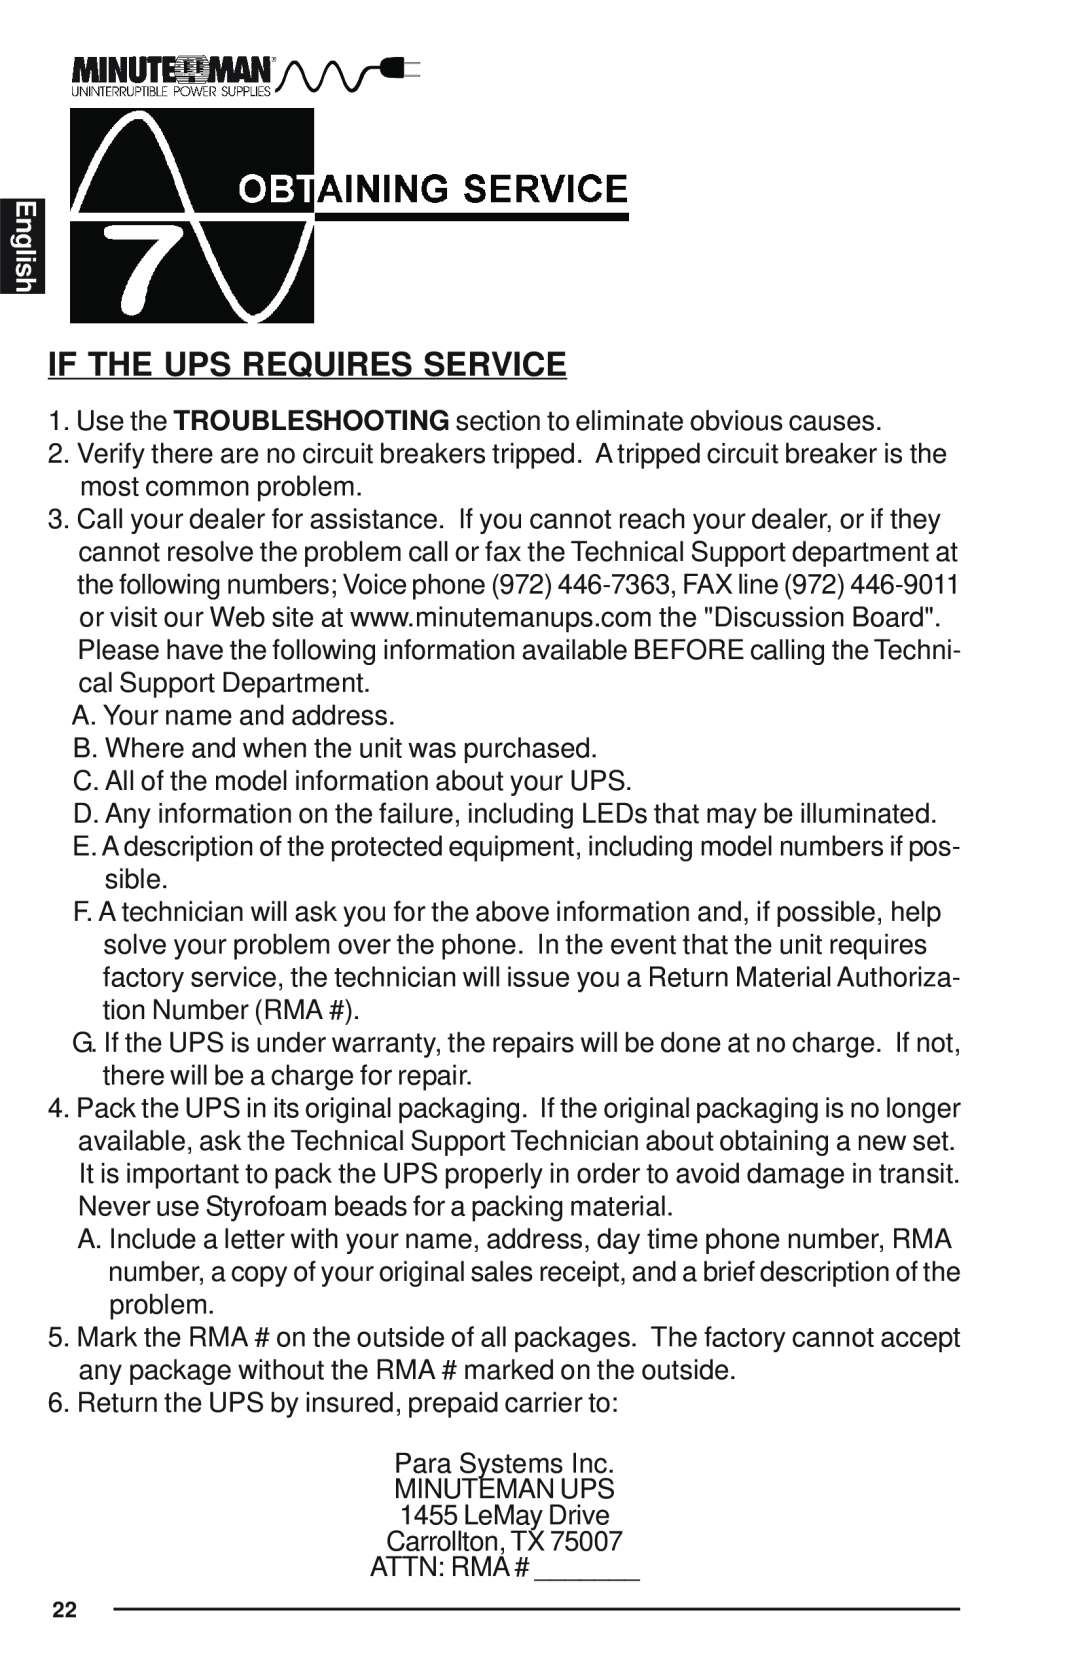 Minuteman UPS Enterprise Plus Series user manual If The Ups Requires Service, English 